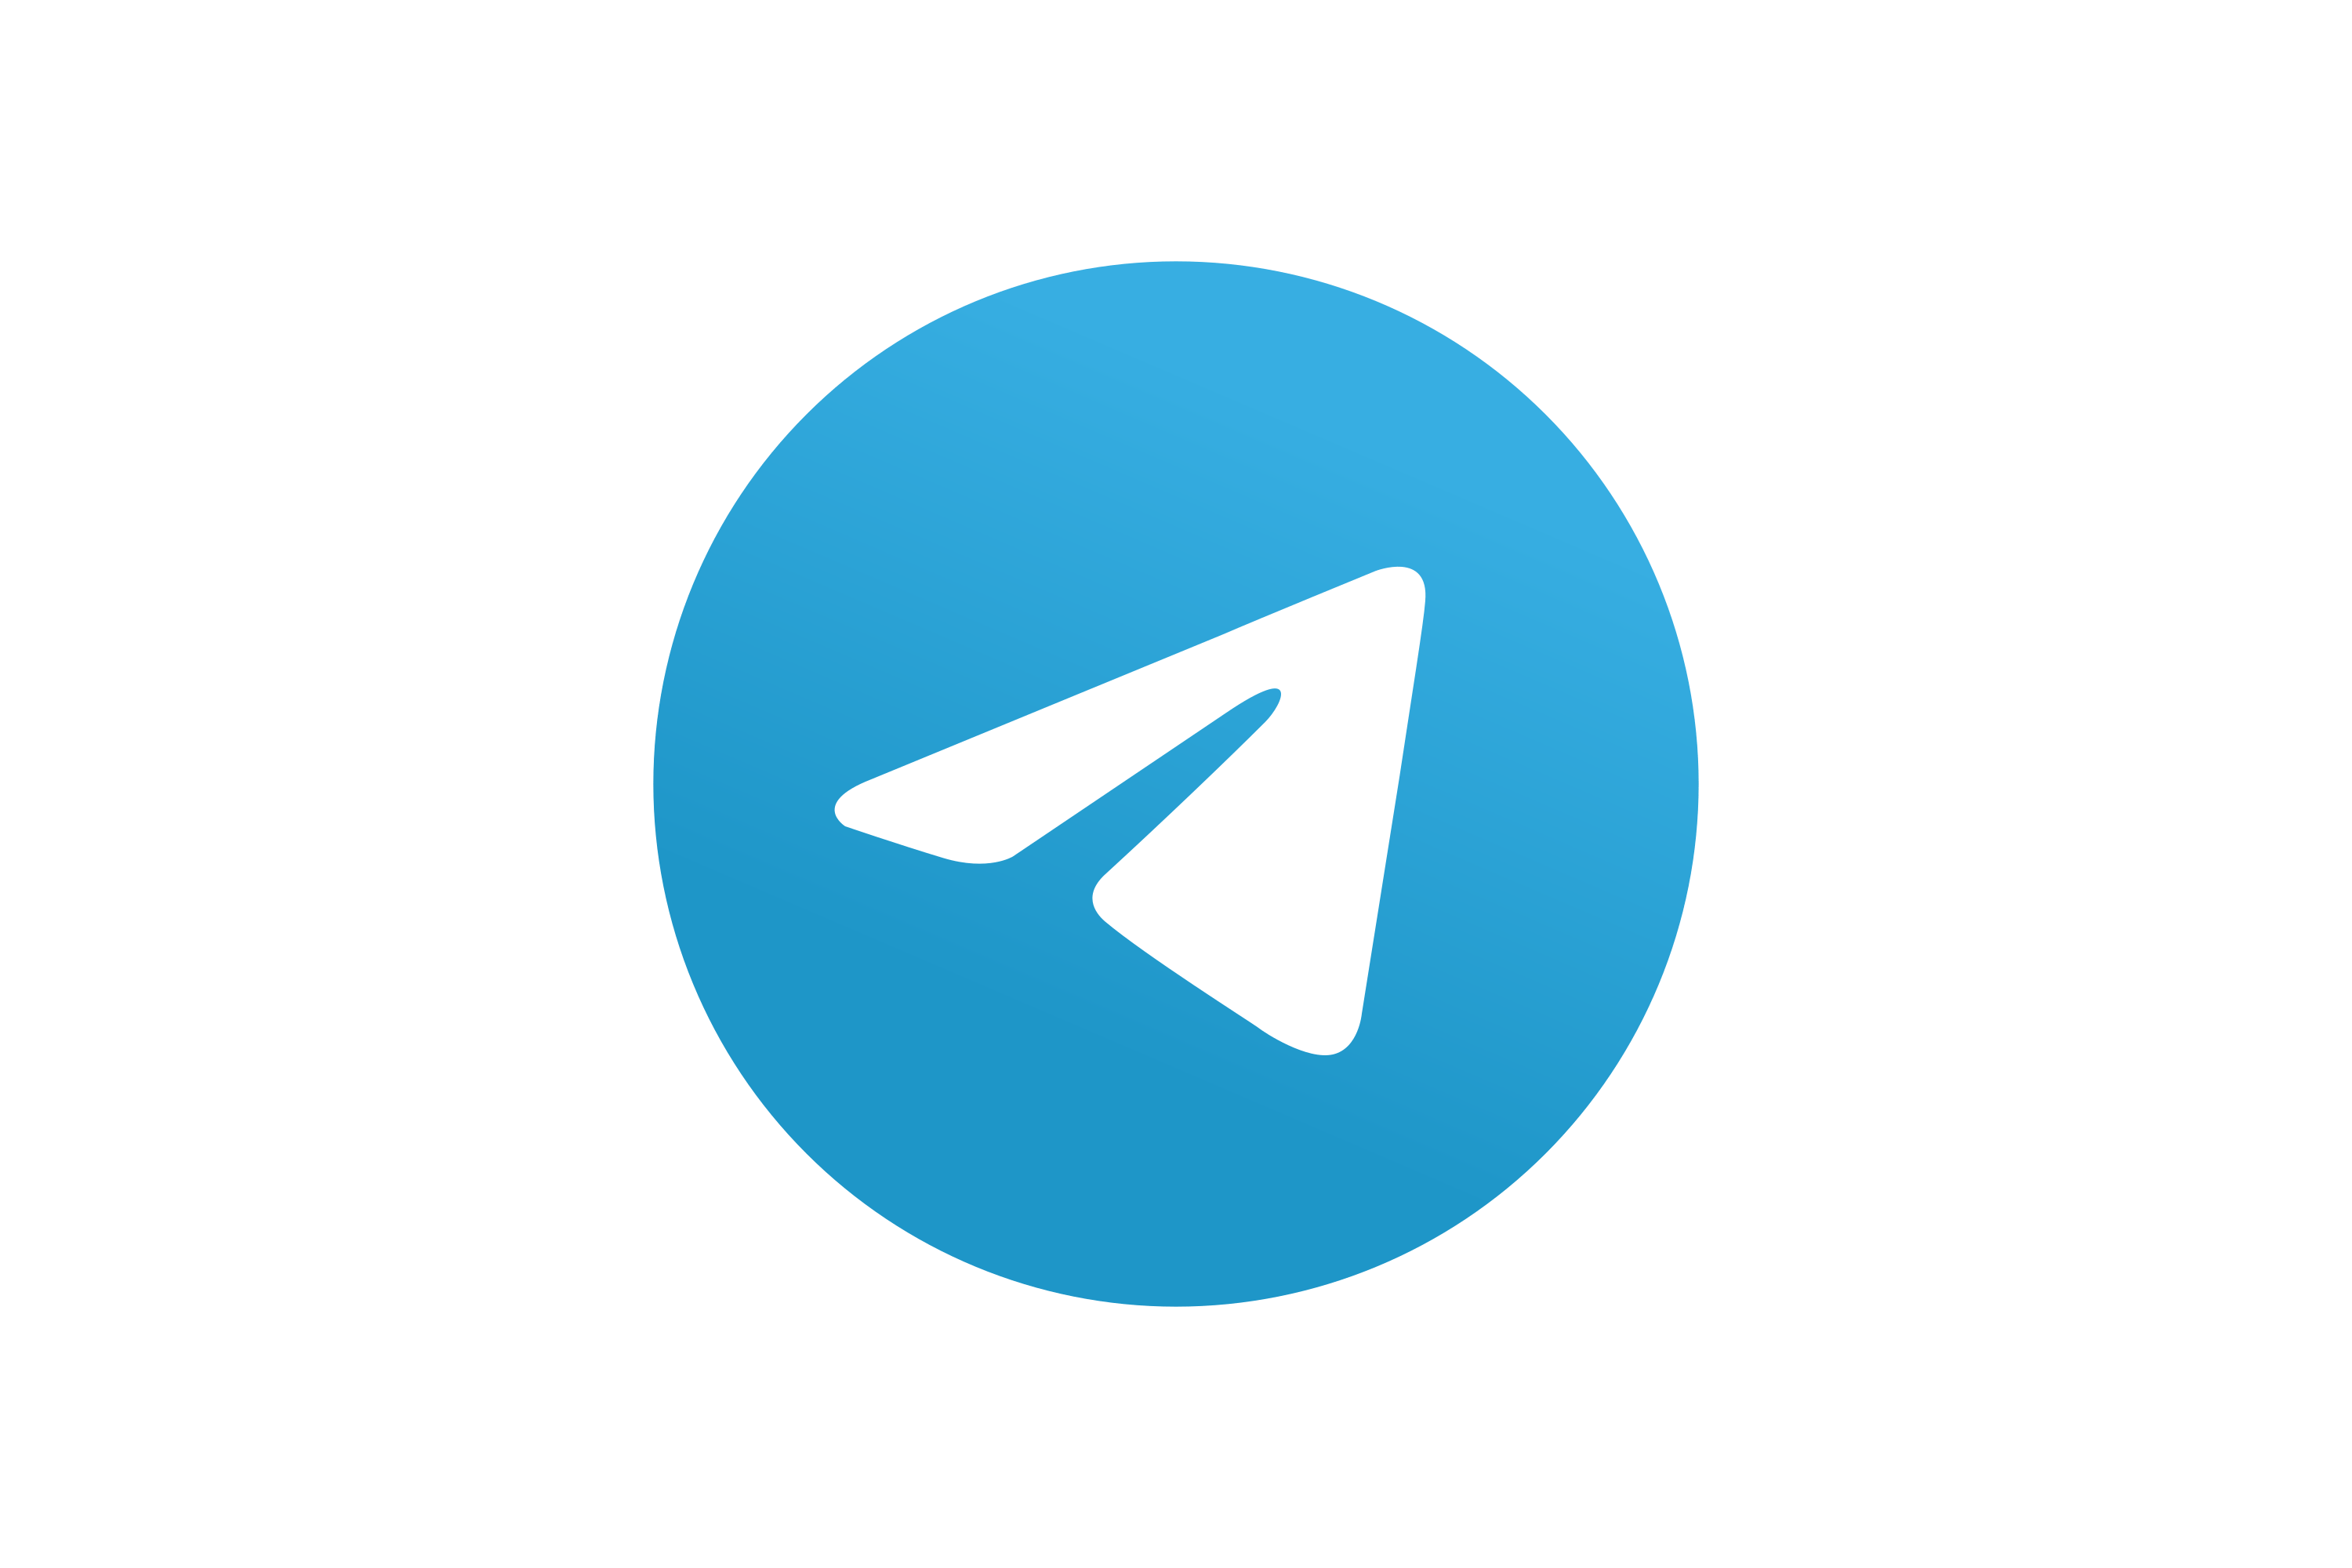 Subscribe to the Telegram channel